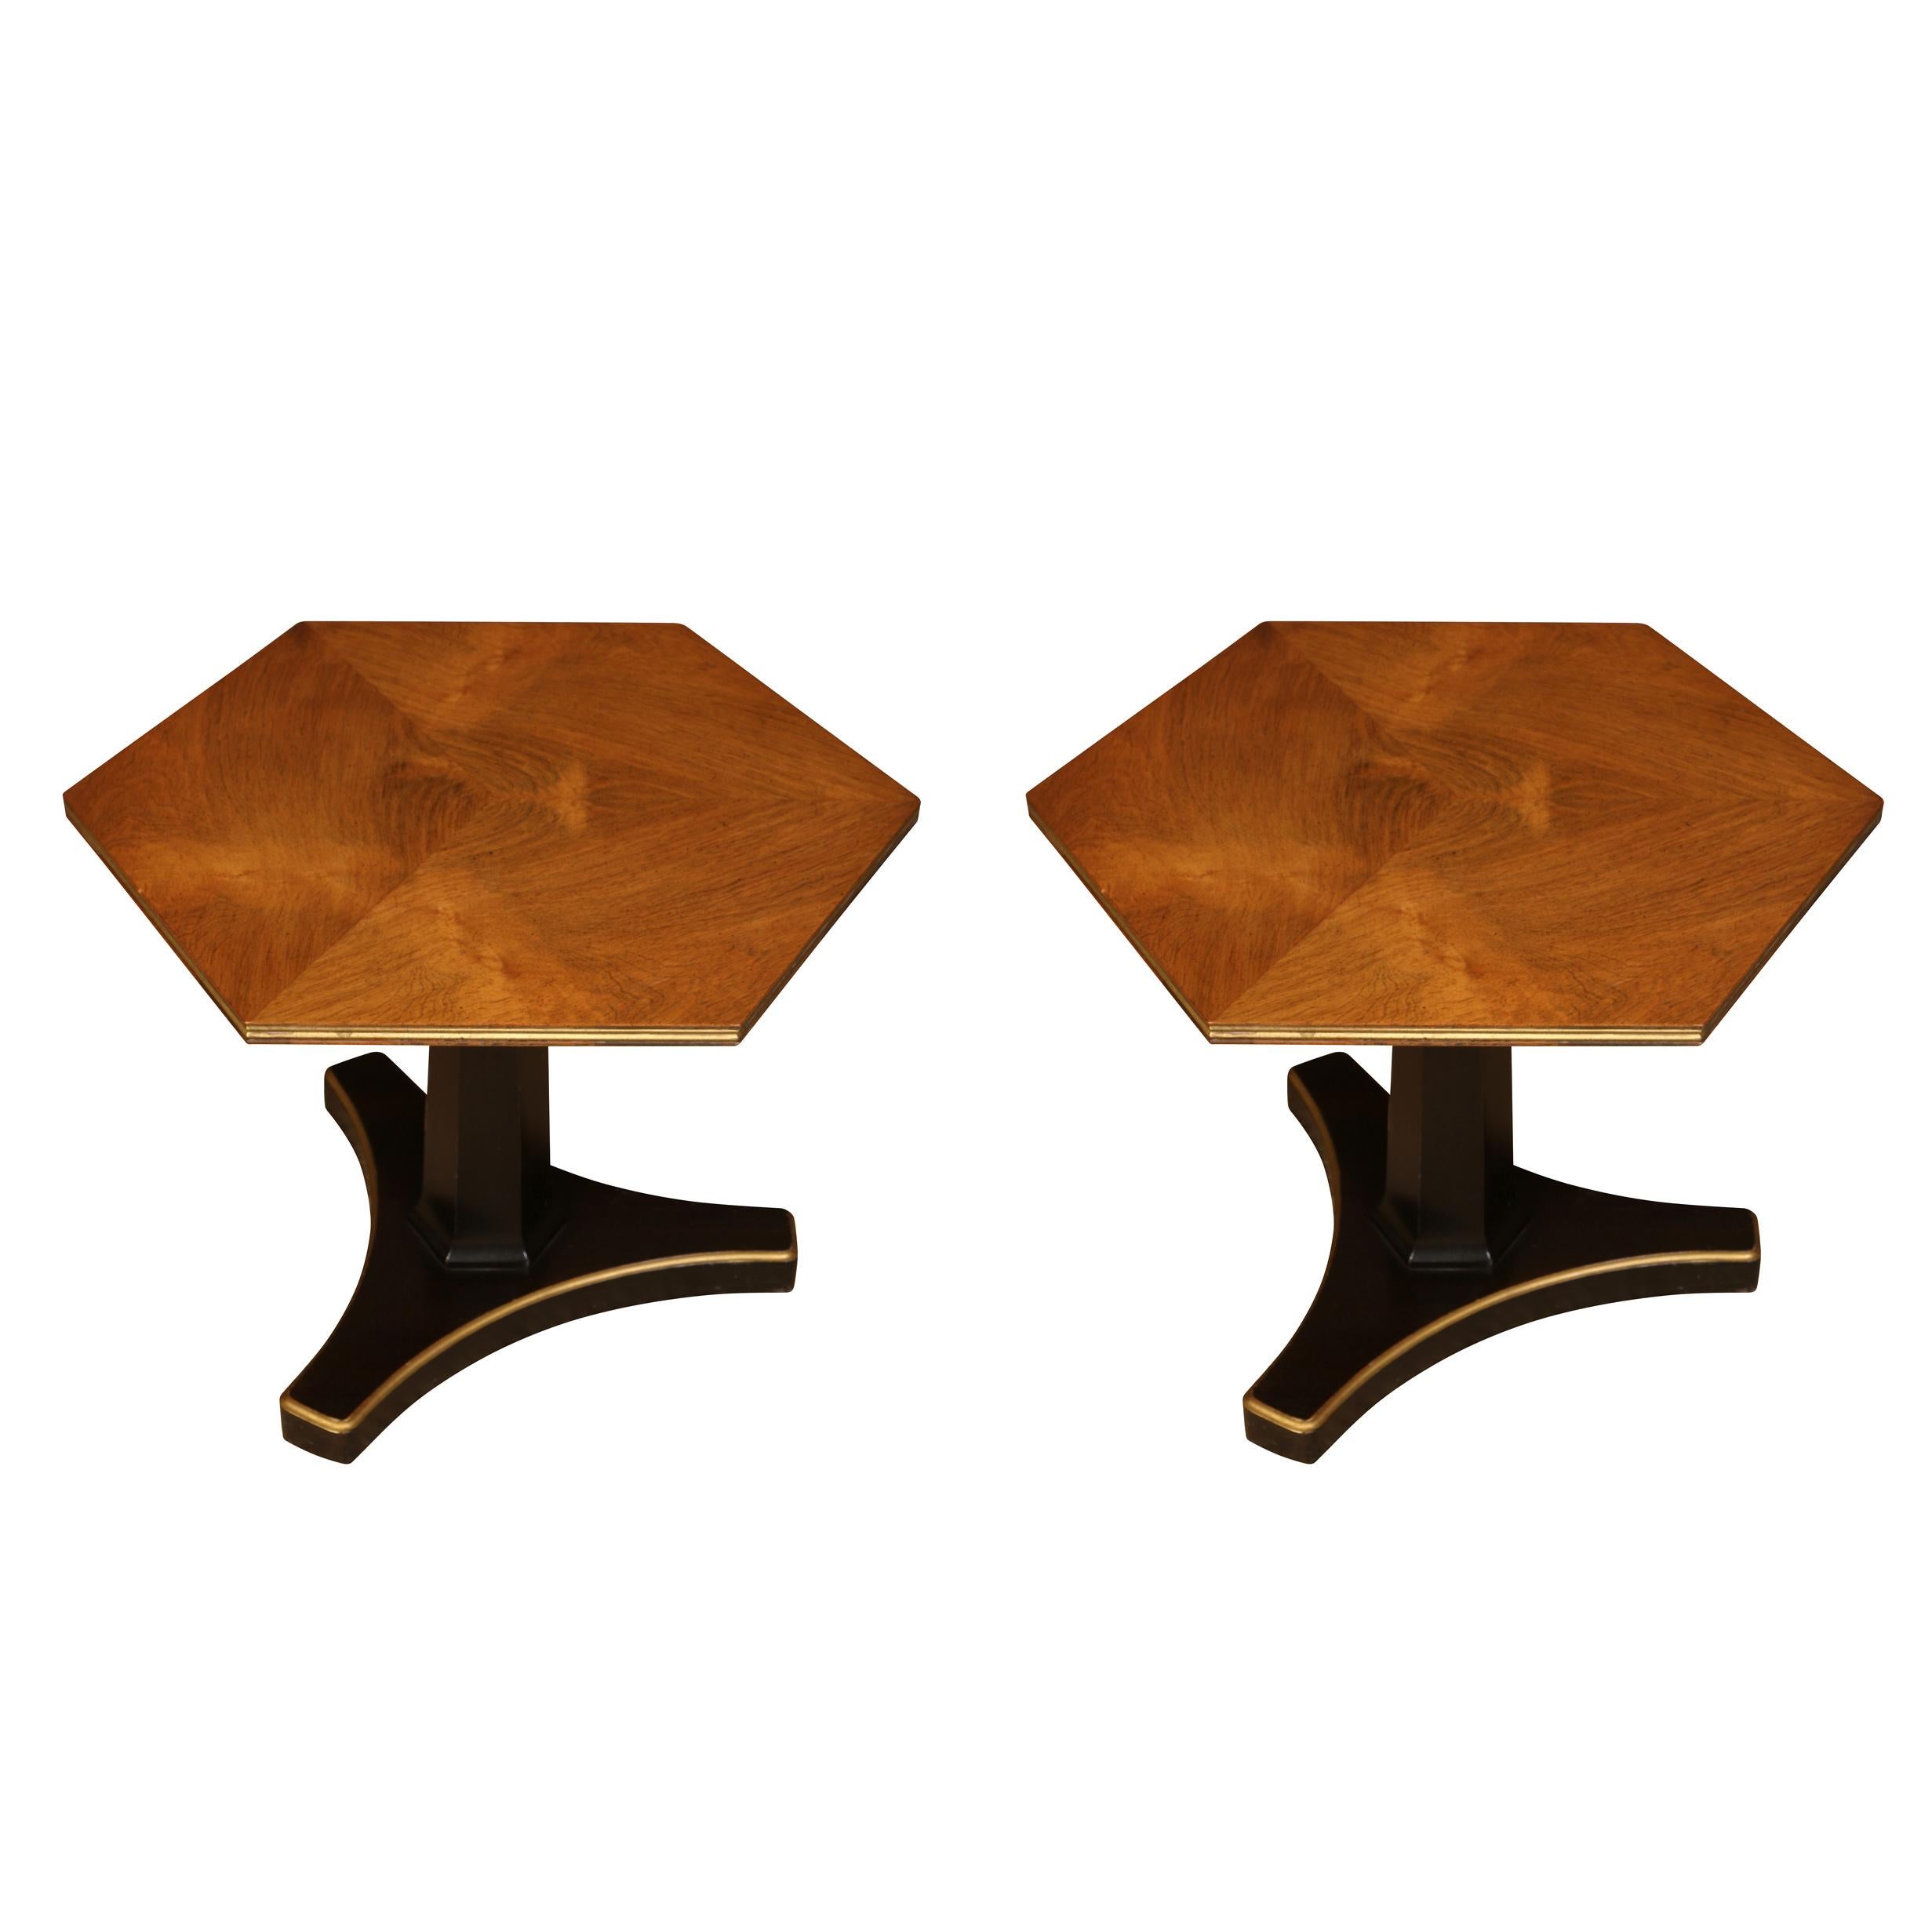 20th Century Pair of Petite Hexagonal Regency Ebonized Side Tables with Walnut Tops For Sale